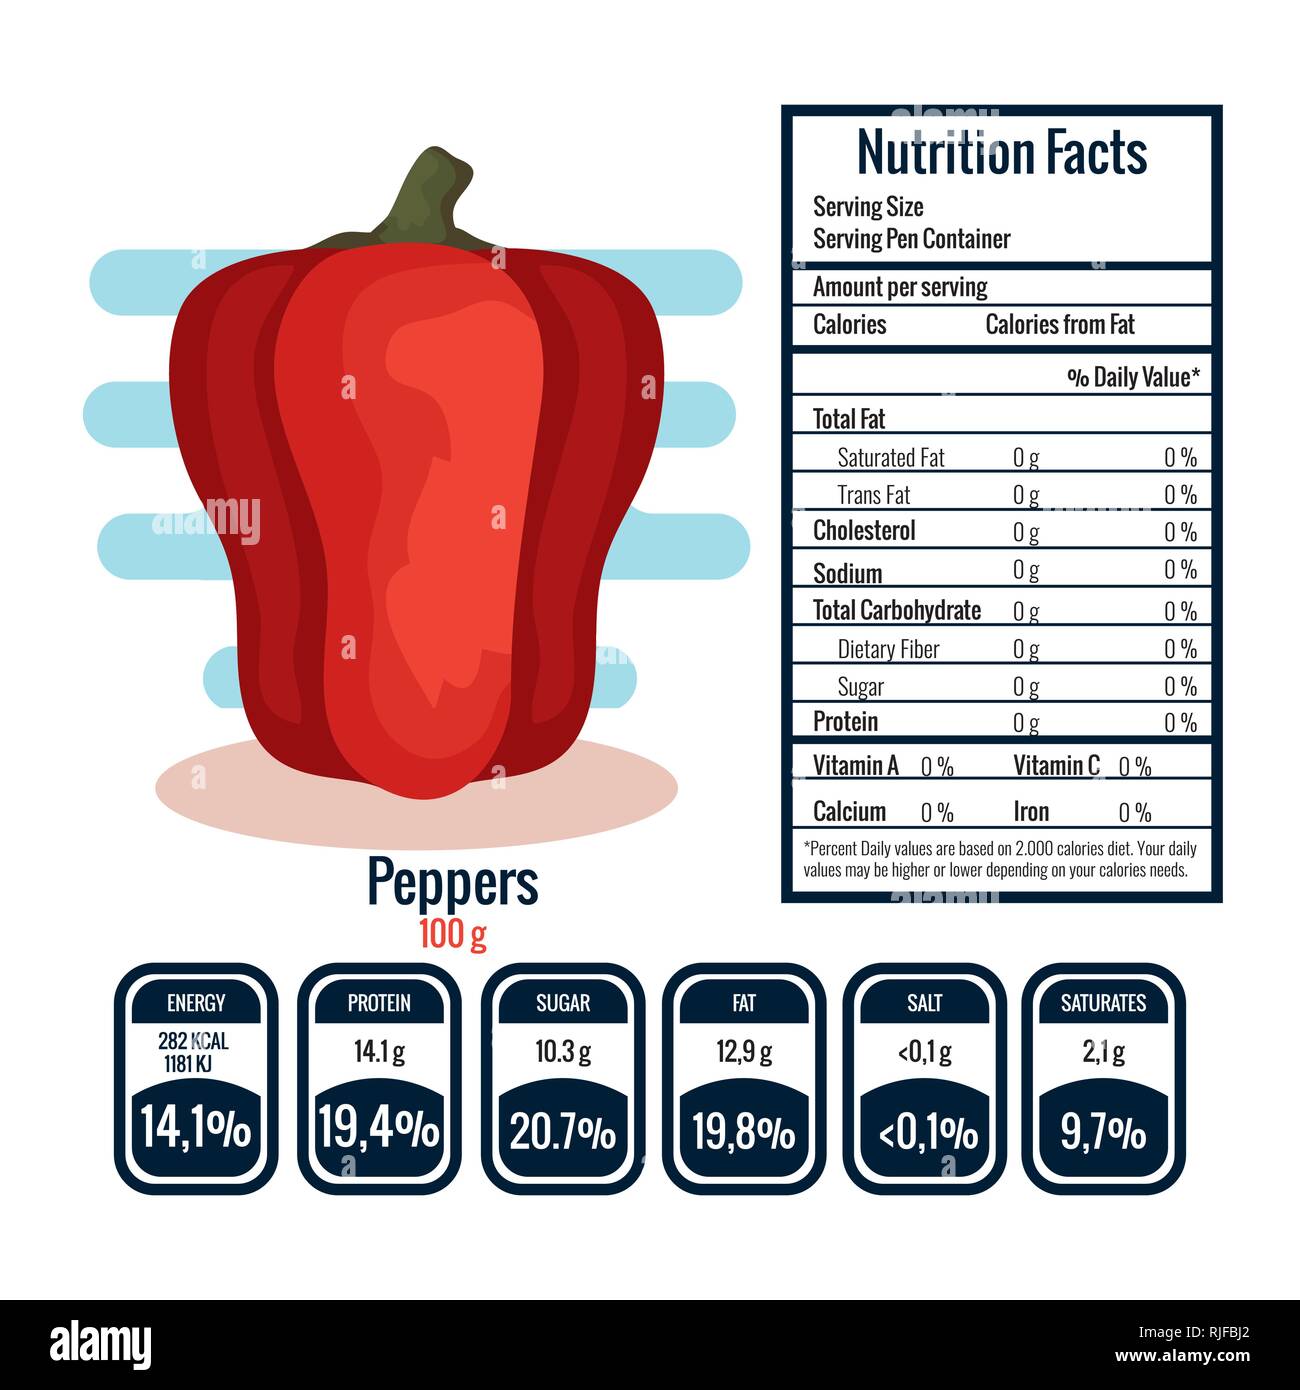 fresh pepper with nutrition facts Image & Art Alamy